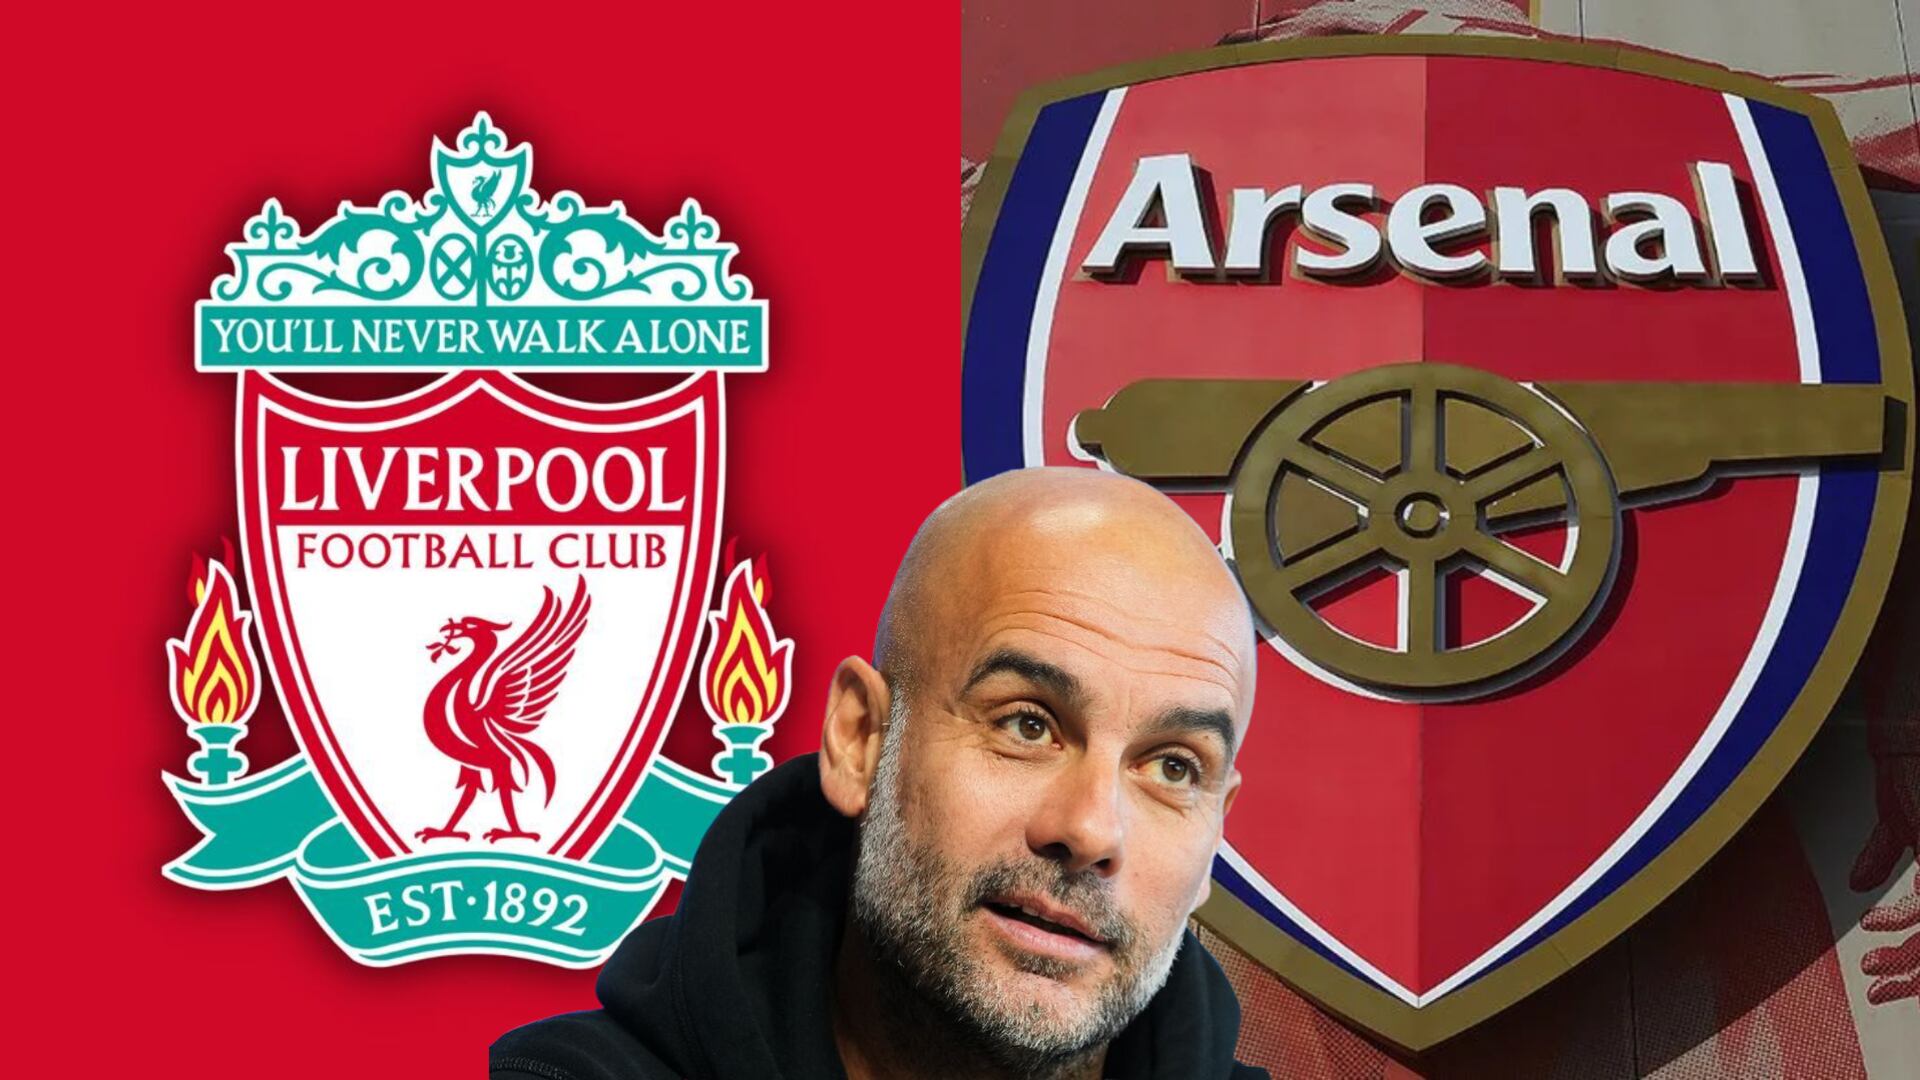 City's Pep Guardiola heats up title race after talking about Liverpool & Arsenal